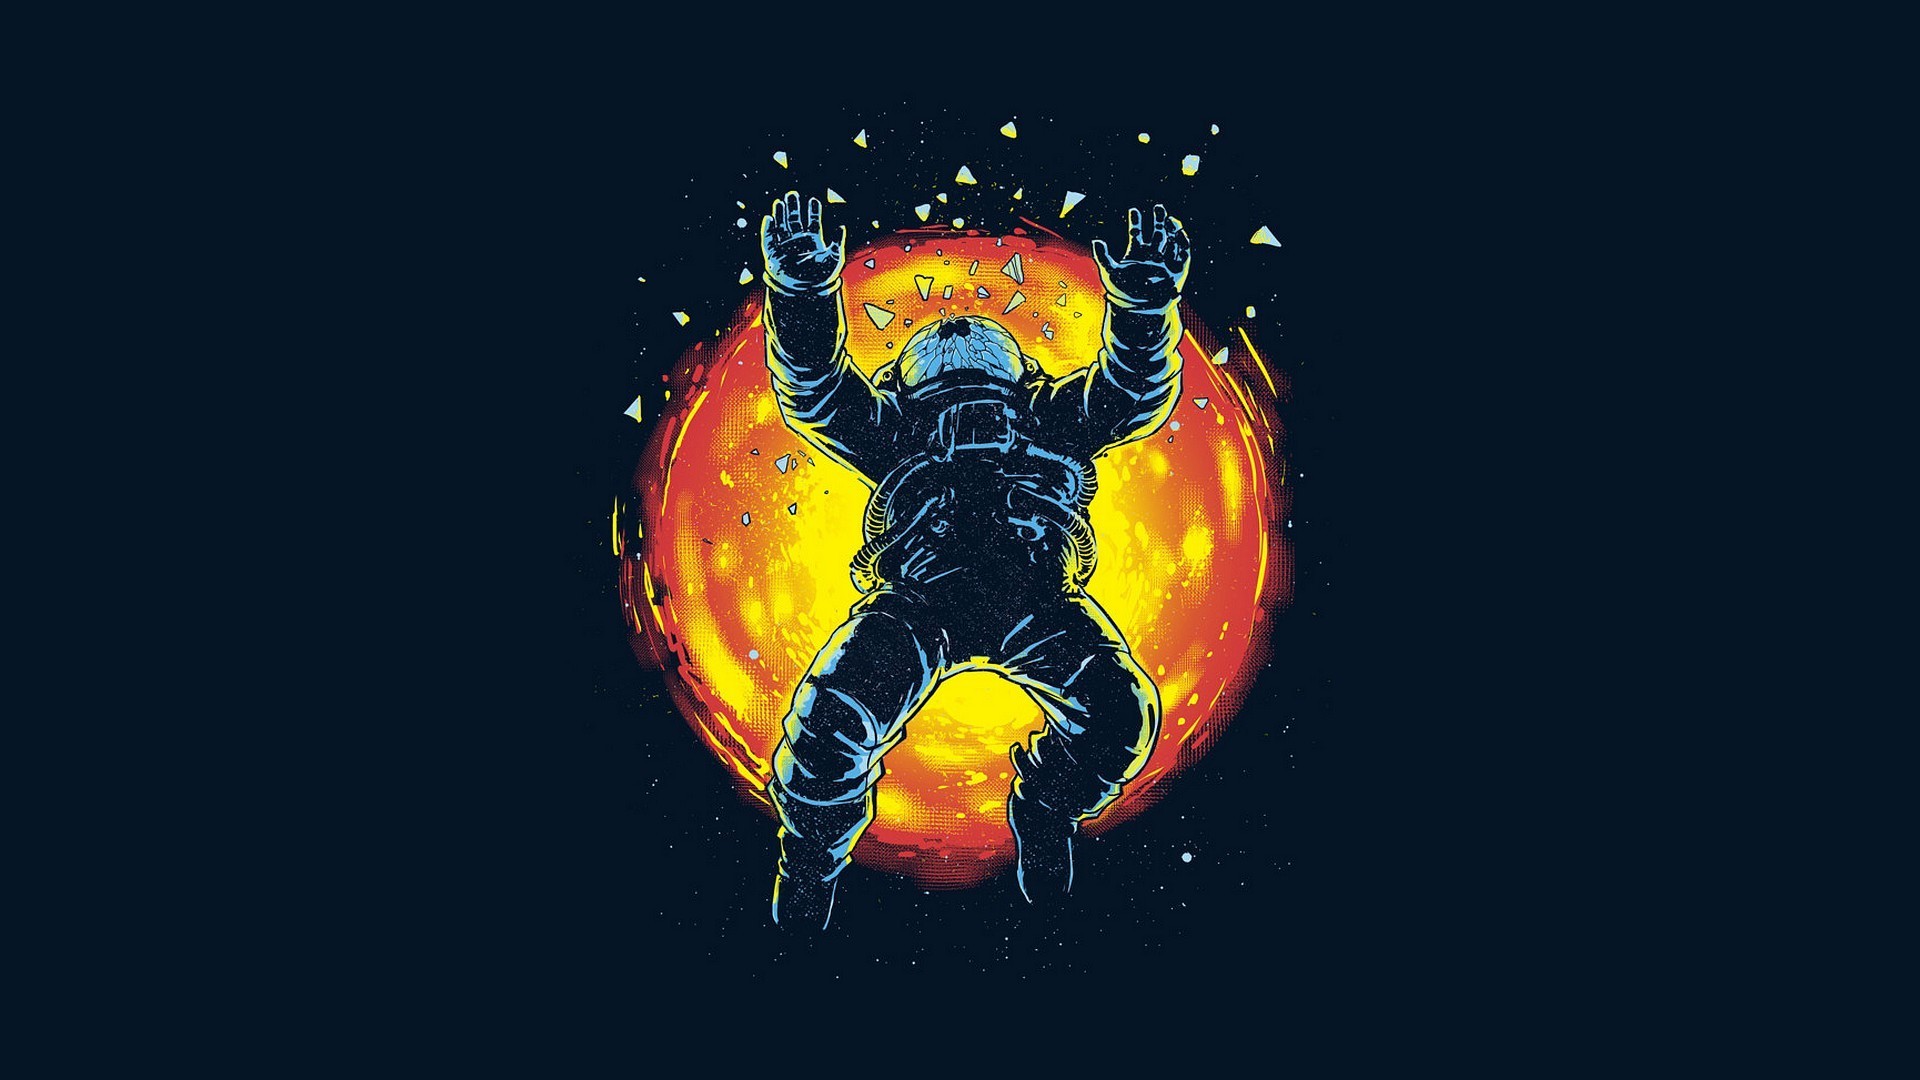 1920x1080 779768587 Spaceman Wallpaper | Download for Free